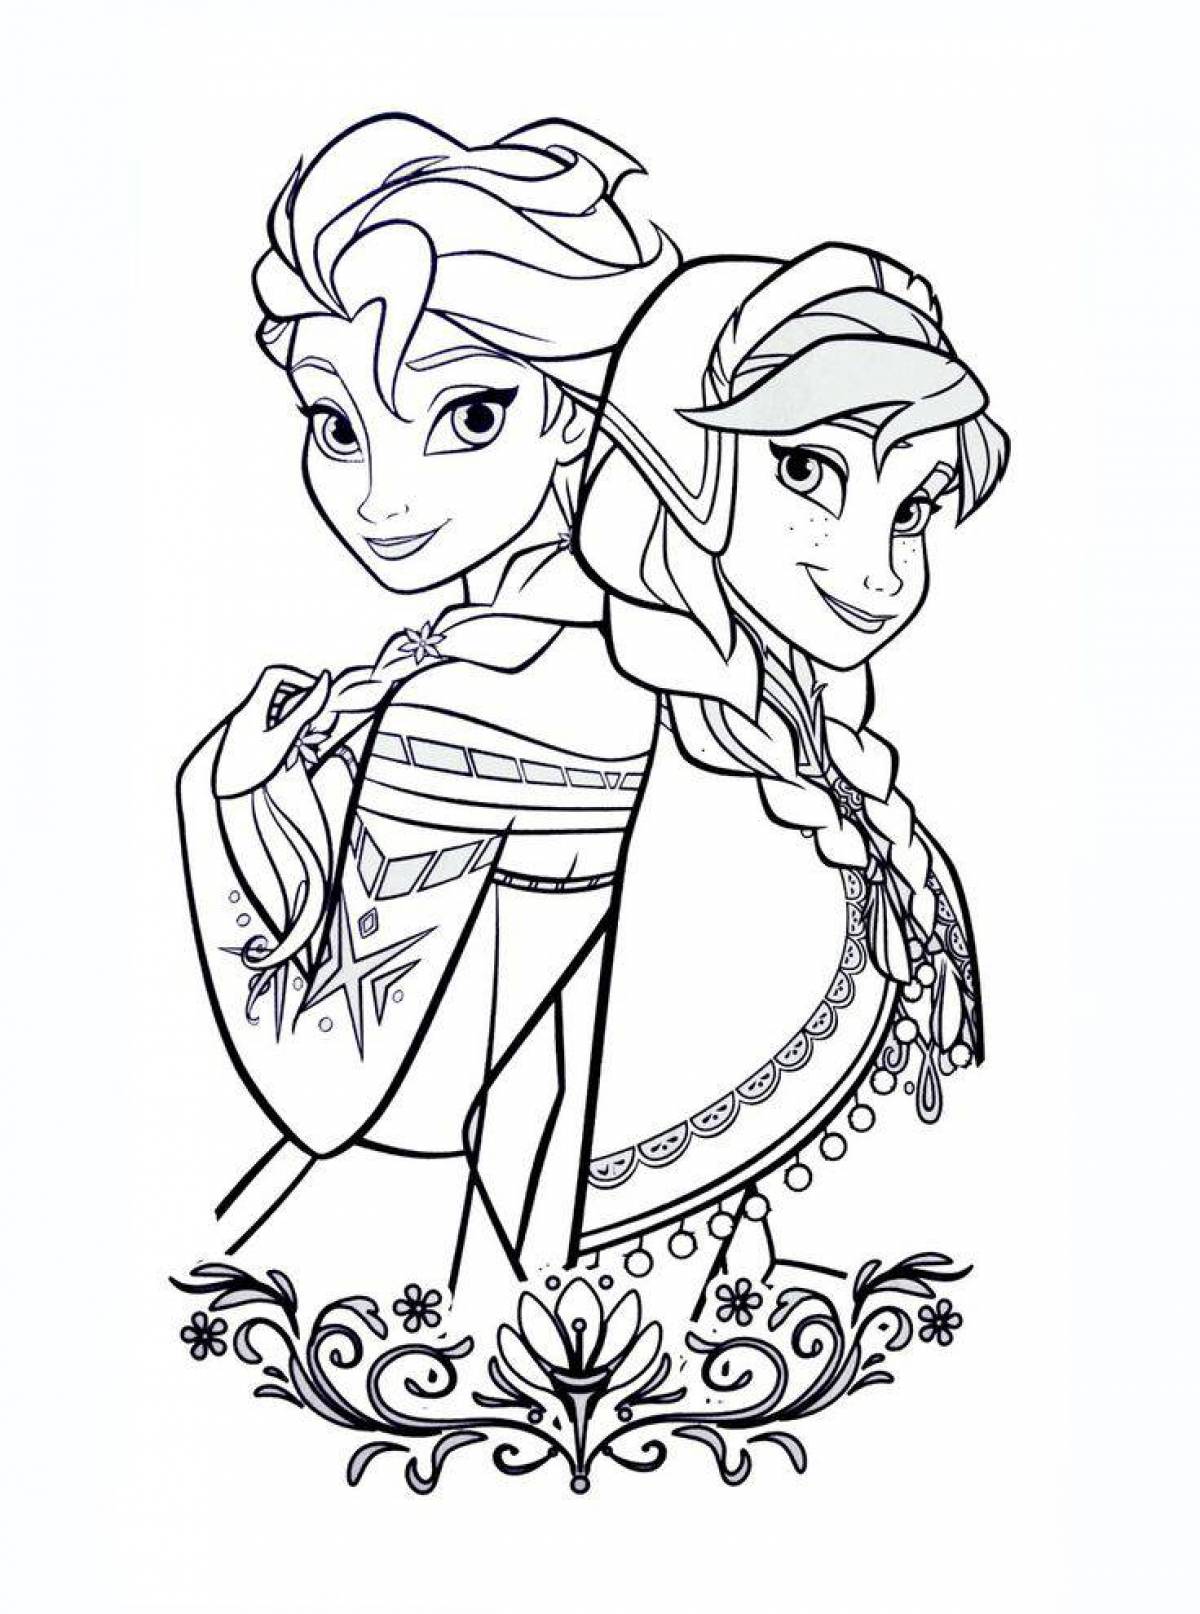 Elsa and anna magic coloring book for kids